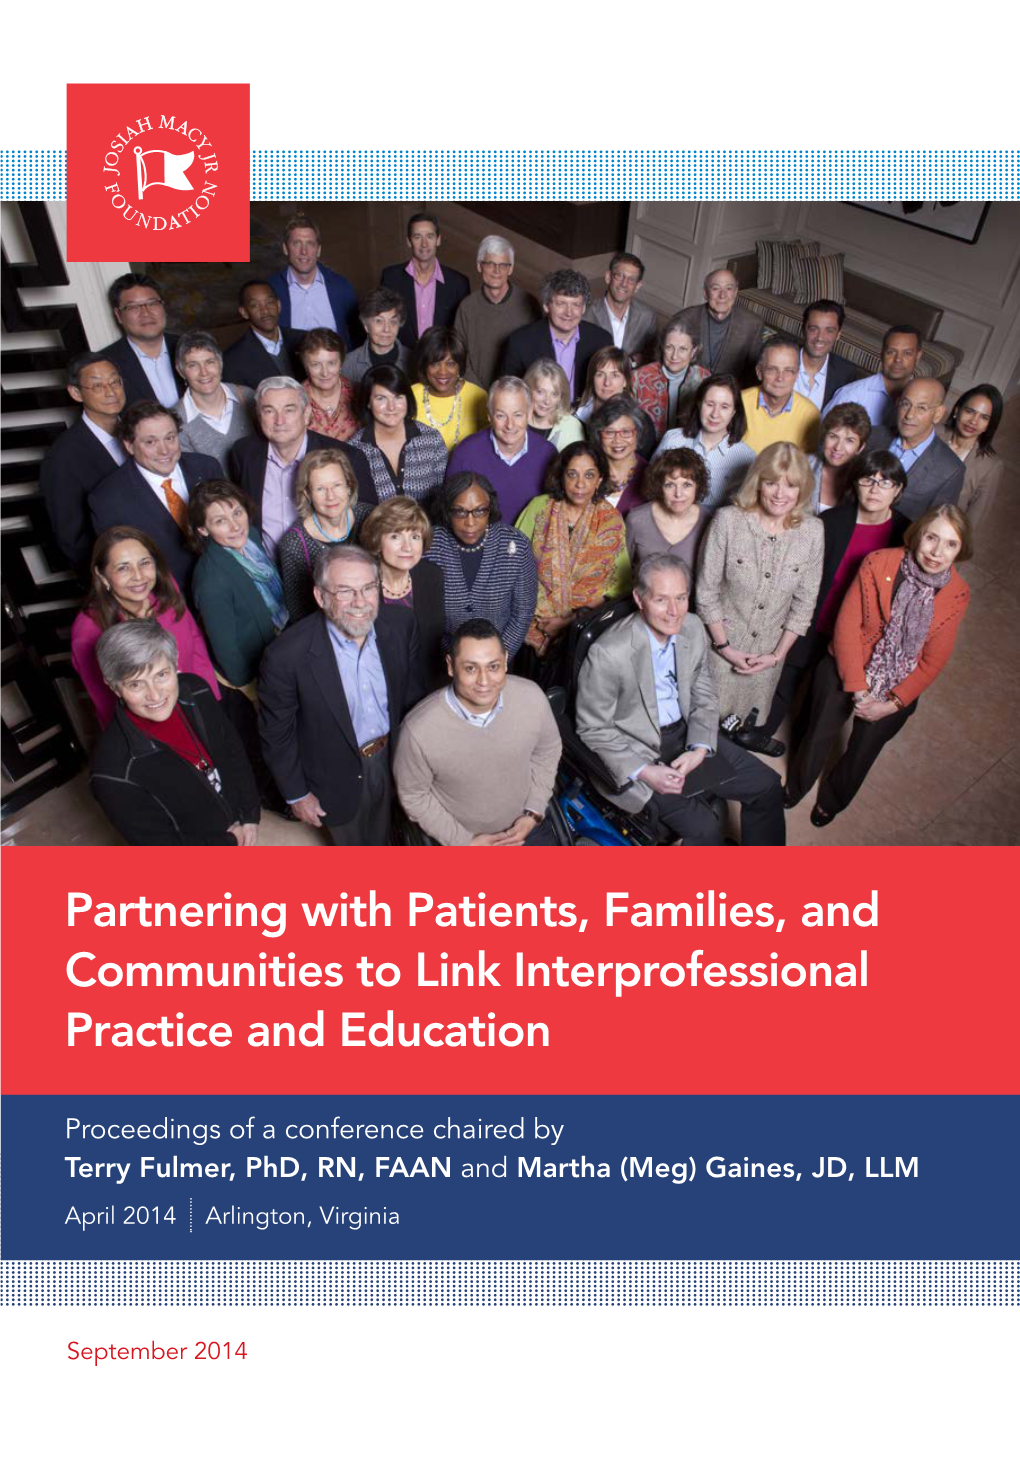 Partnering with Patients, Families, and Communities to Link Interprofessional Practice and Education